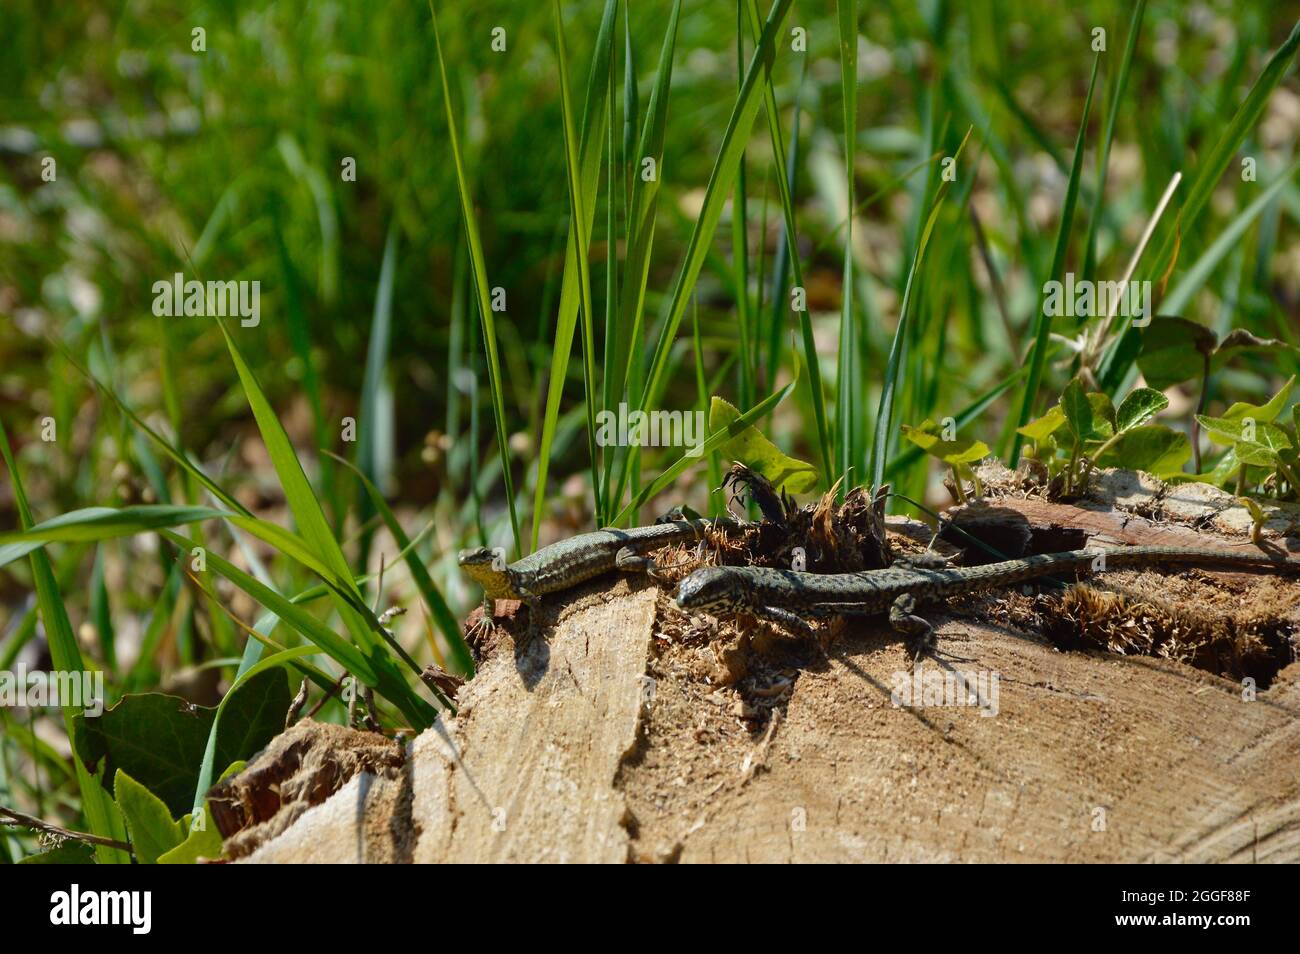 lizards strolling among the greenery under the sun Stock Photo